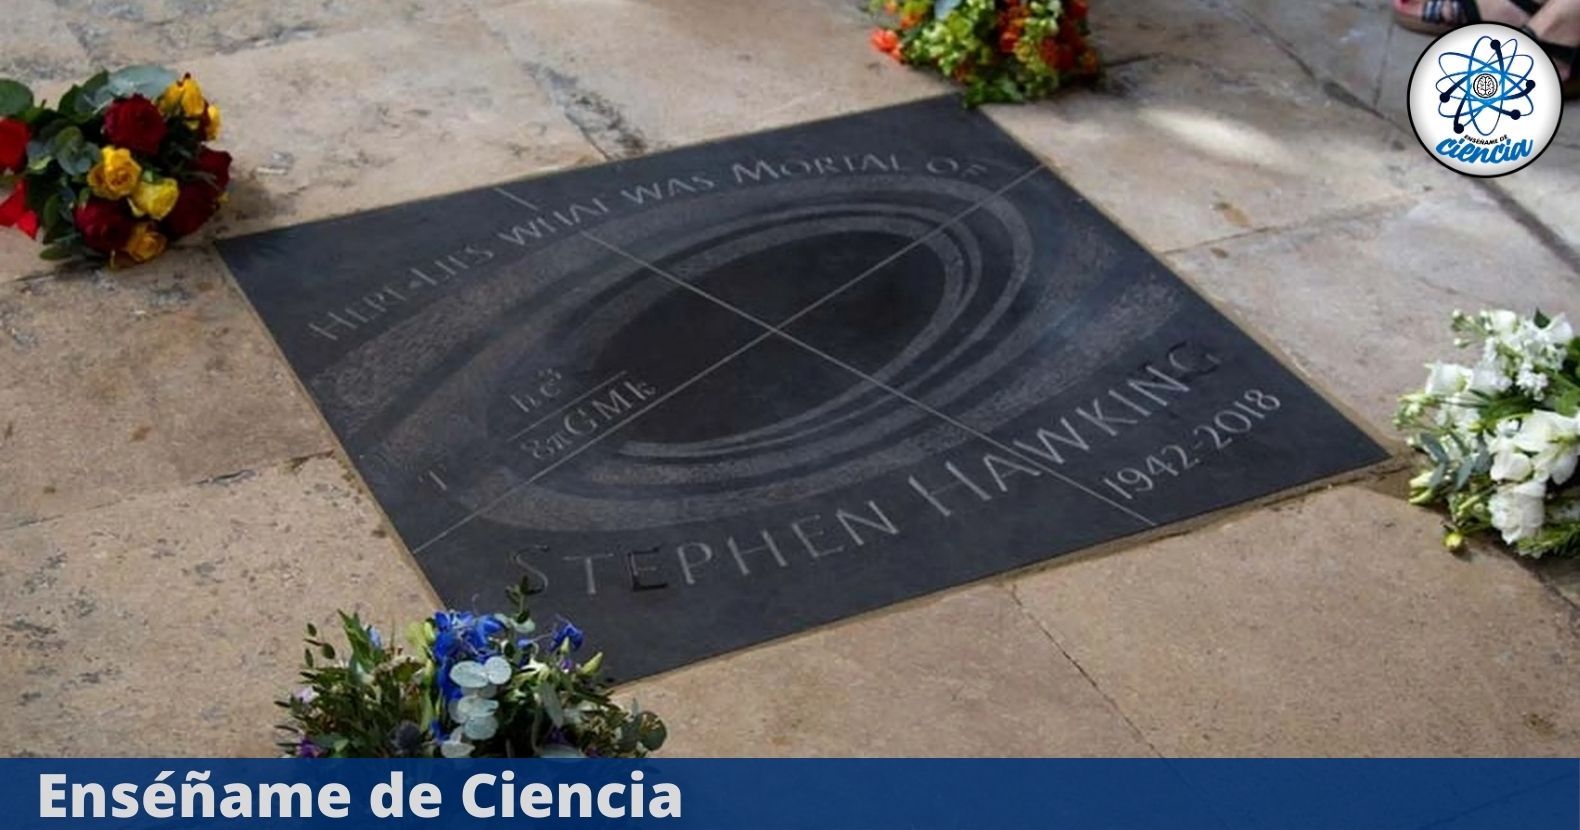 The Evocative Message Carved On Stephen Hawking’s Tombstone That Will Make You Cry With Emotion – Enseñame de Ciencia